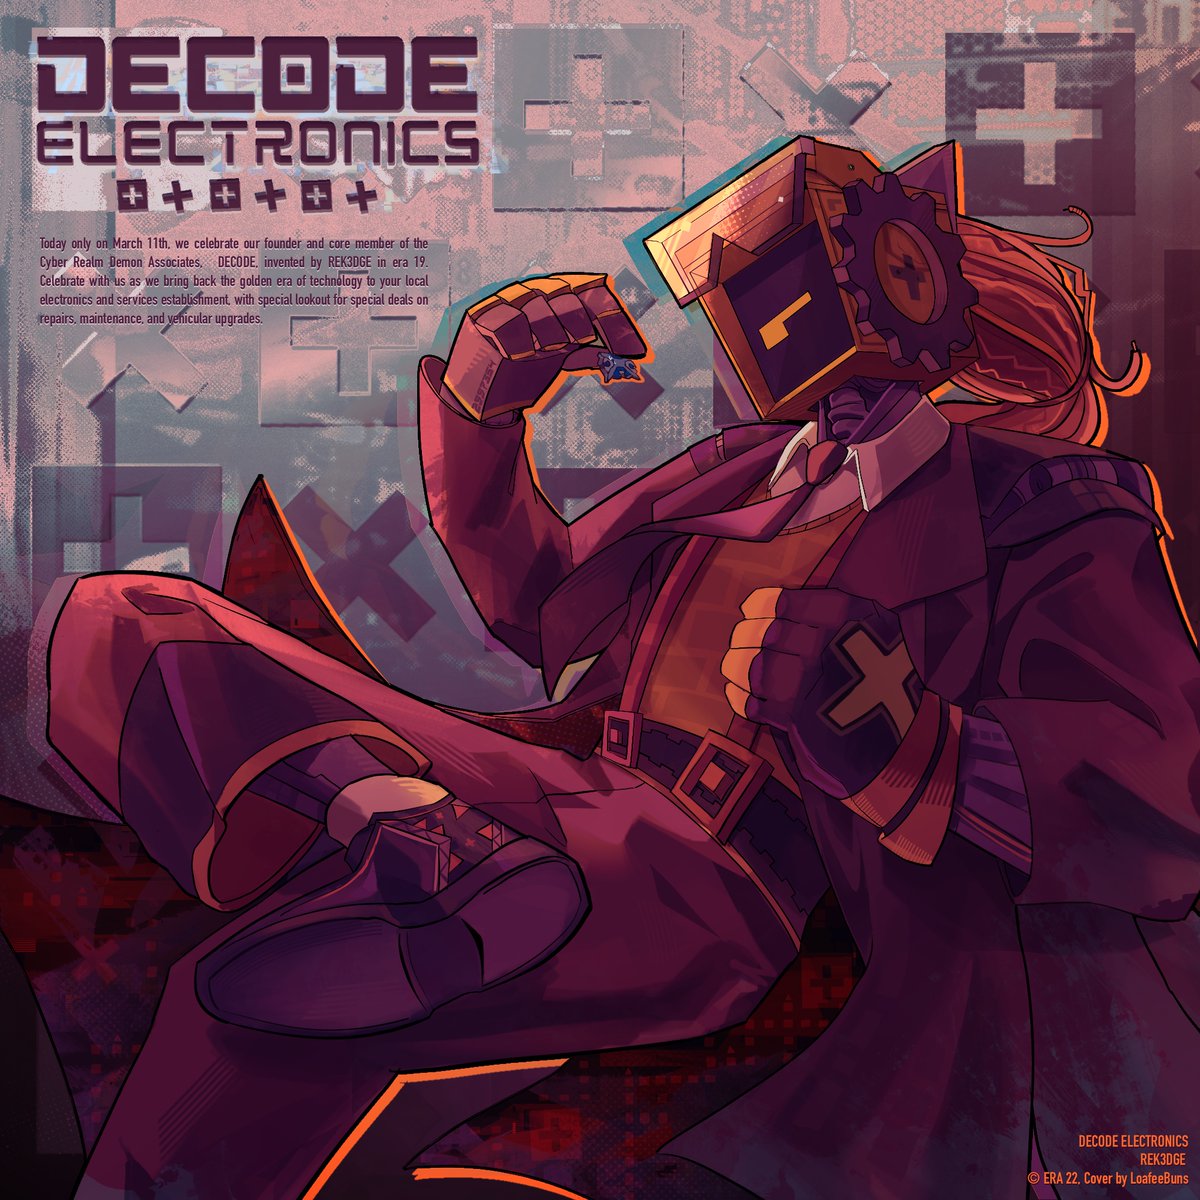 MAR. 11 - DECODE DAY I’m probably late- #GeometryDash #gdloaf